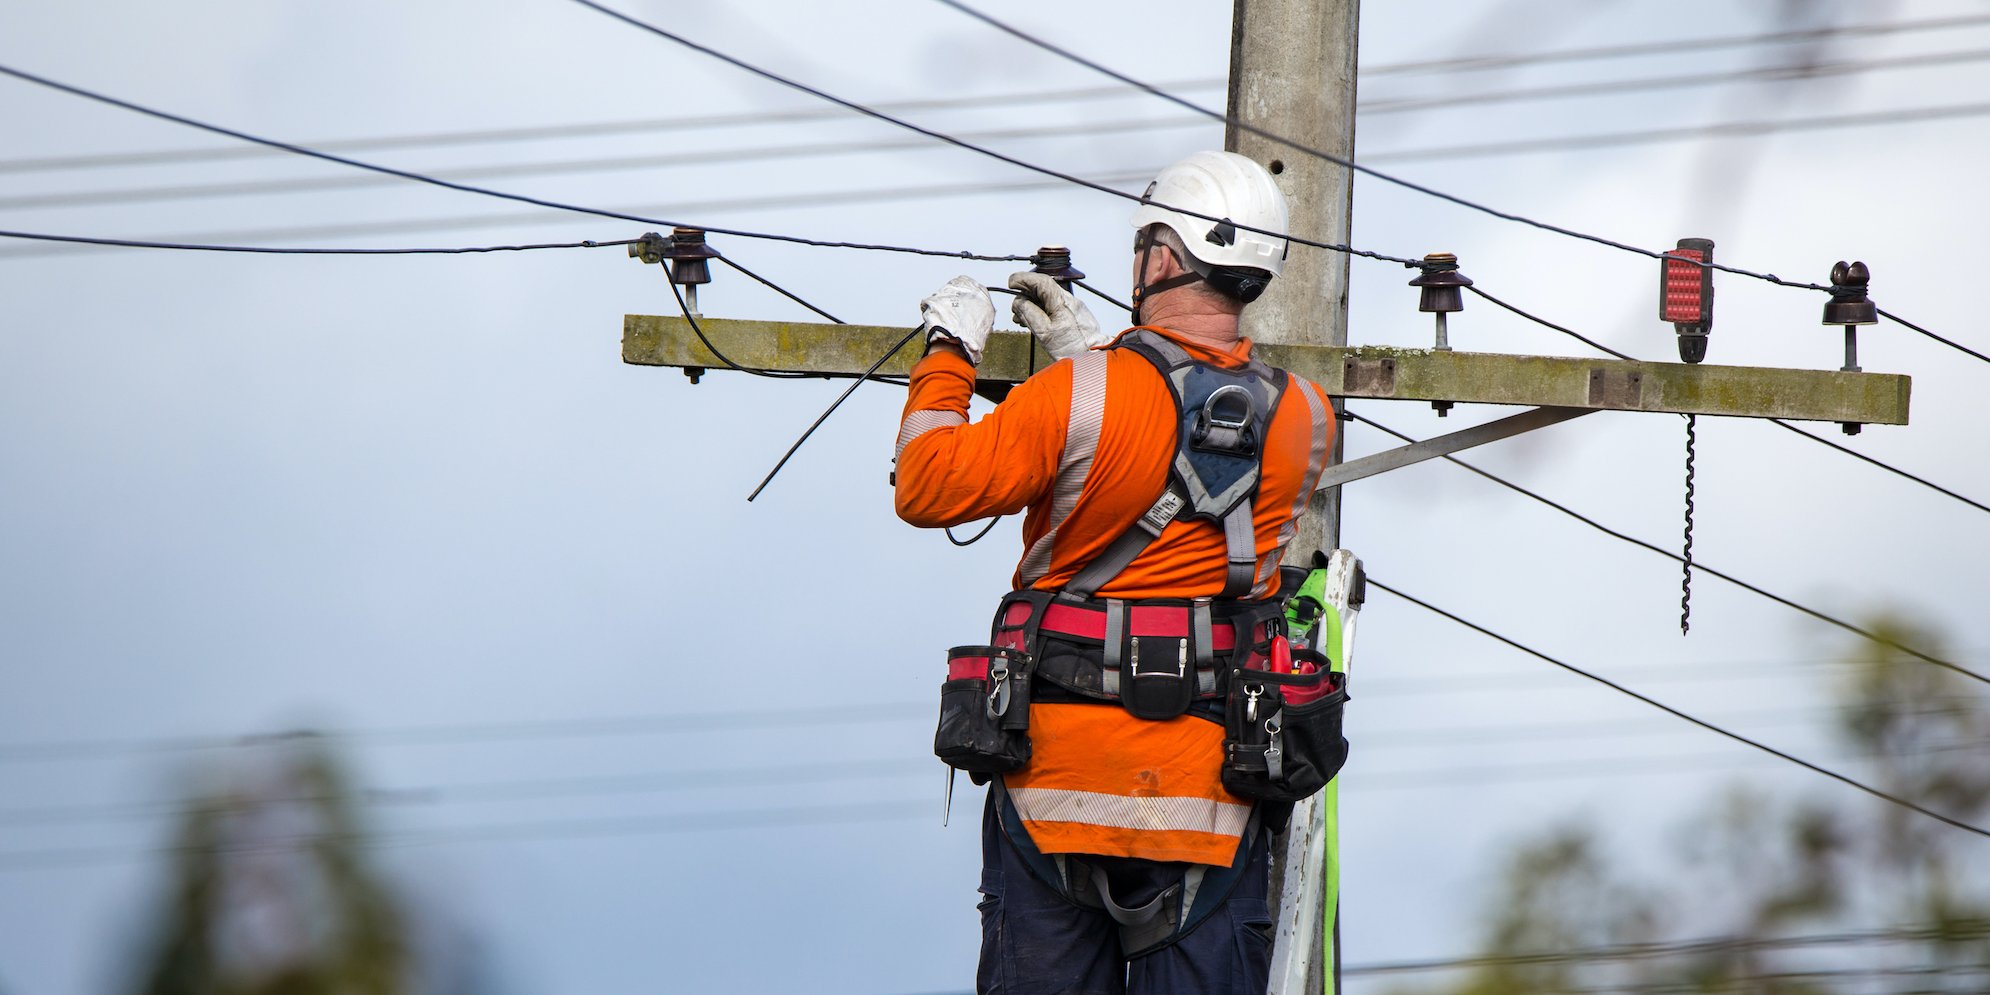 What Are the Top Safety Hazards for Utility Workers?